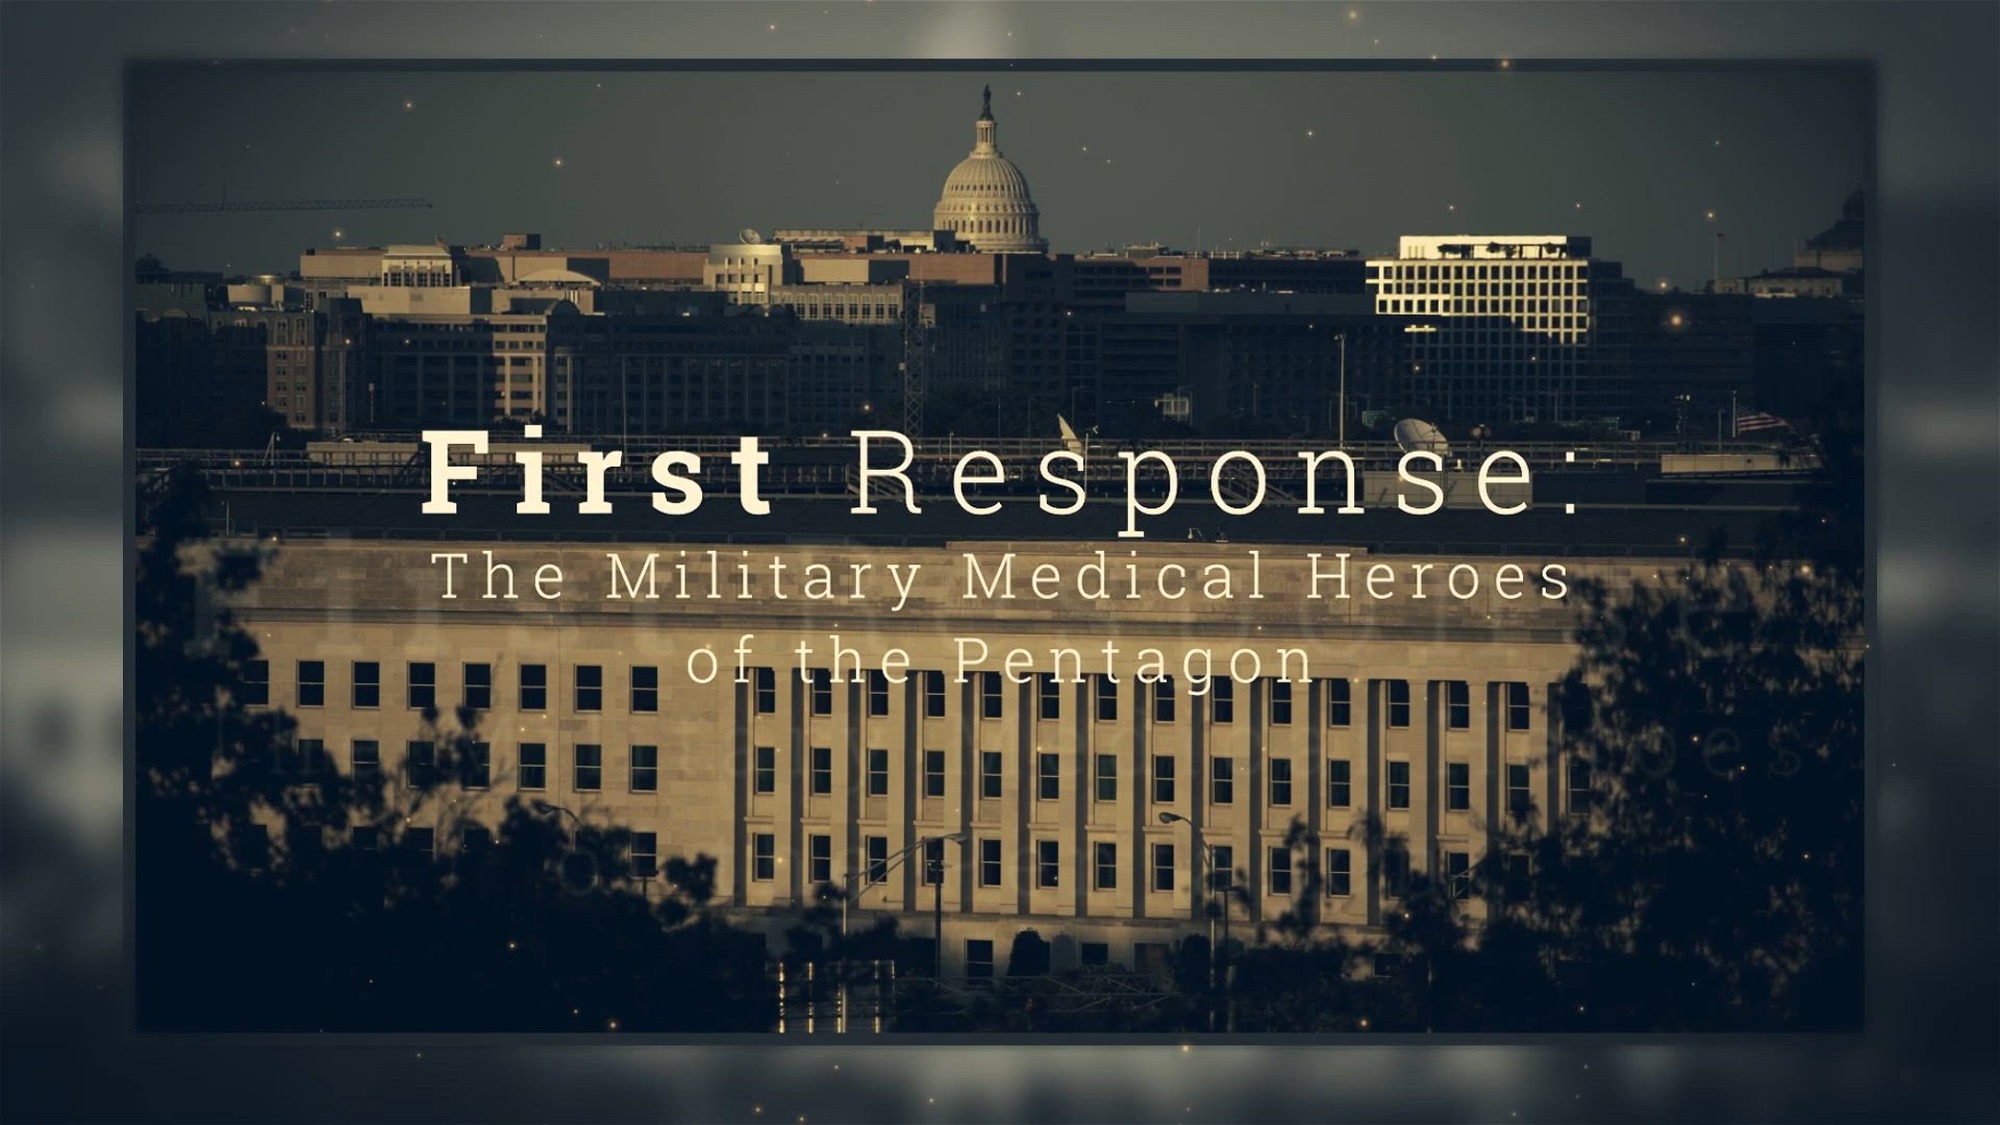 Military response within the first few ours of the attack on the Pentagon during 9/11 serves as a shining example of our military medical readiness and discipline.